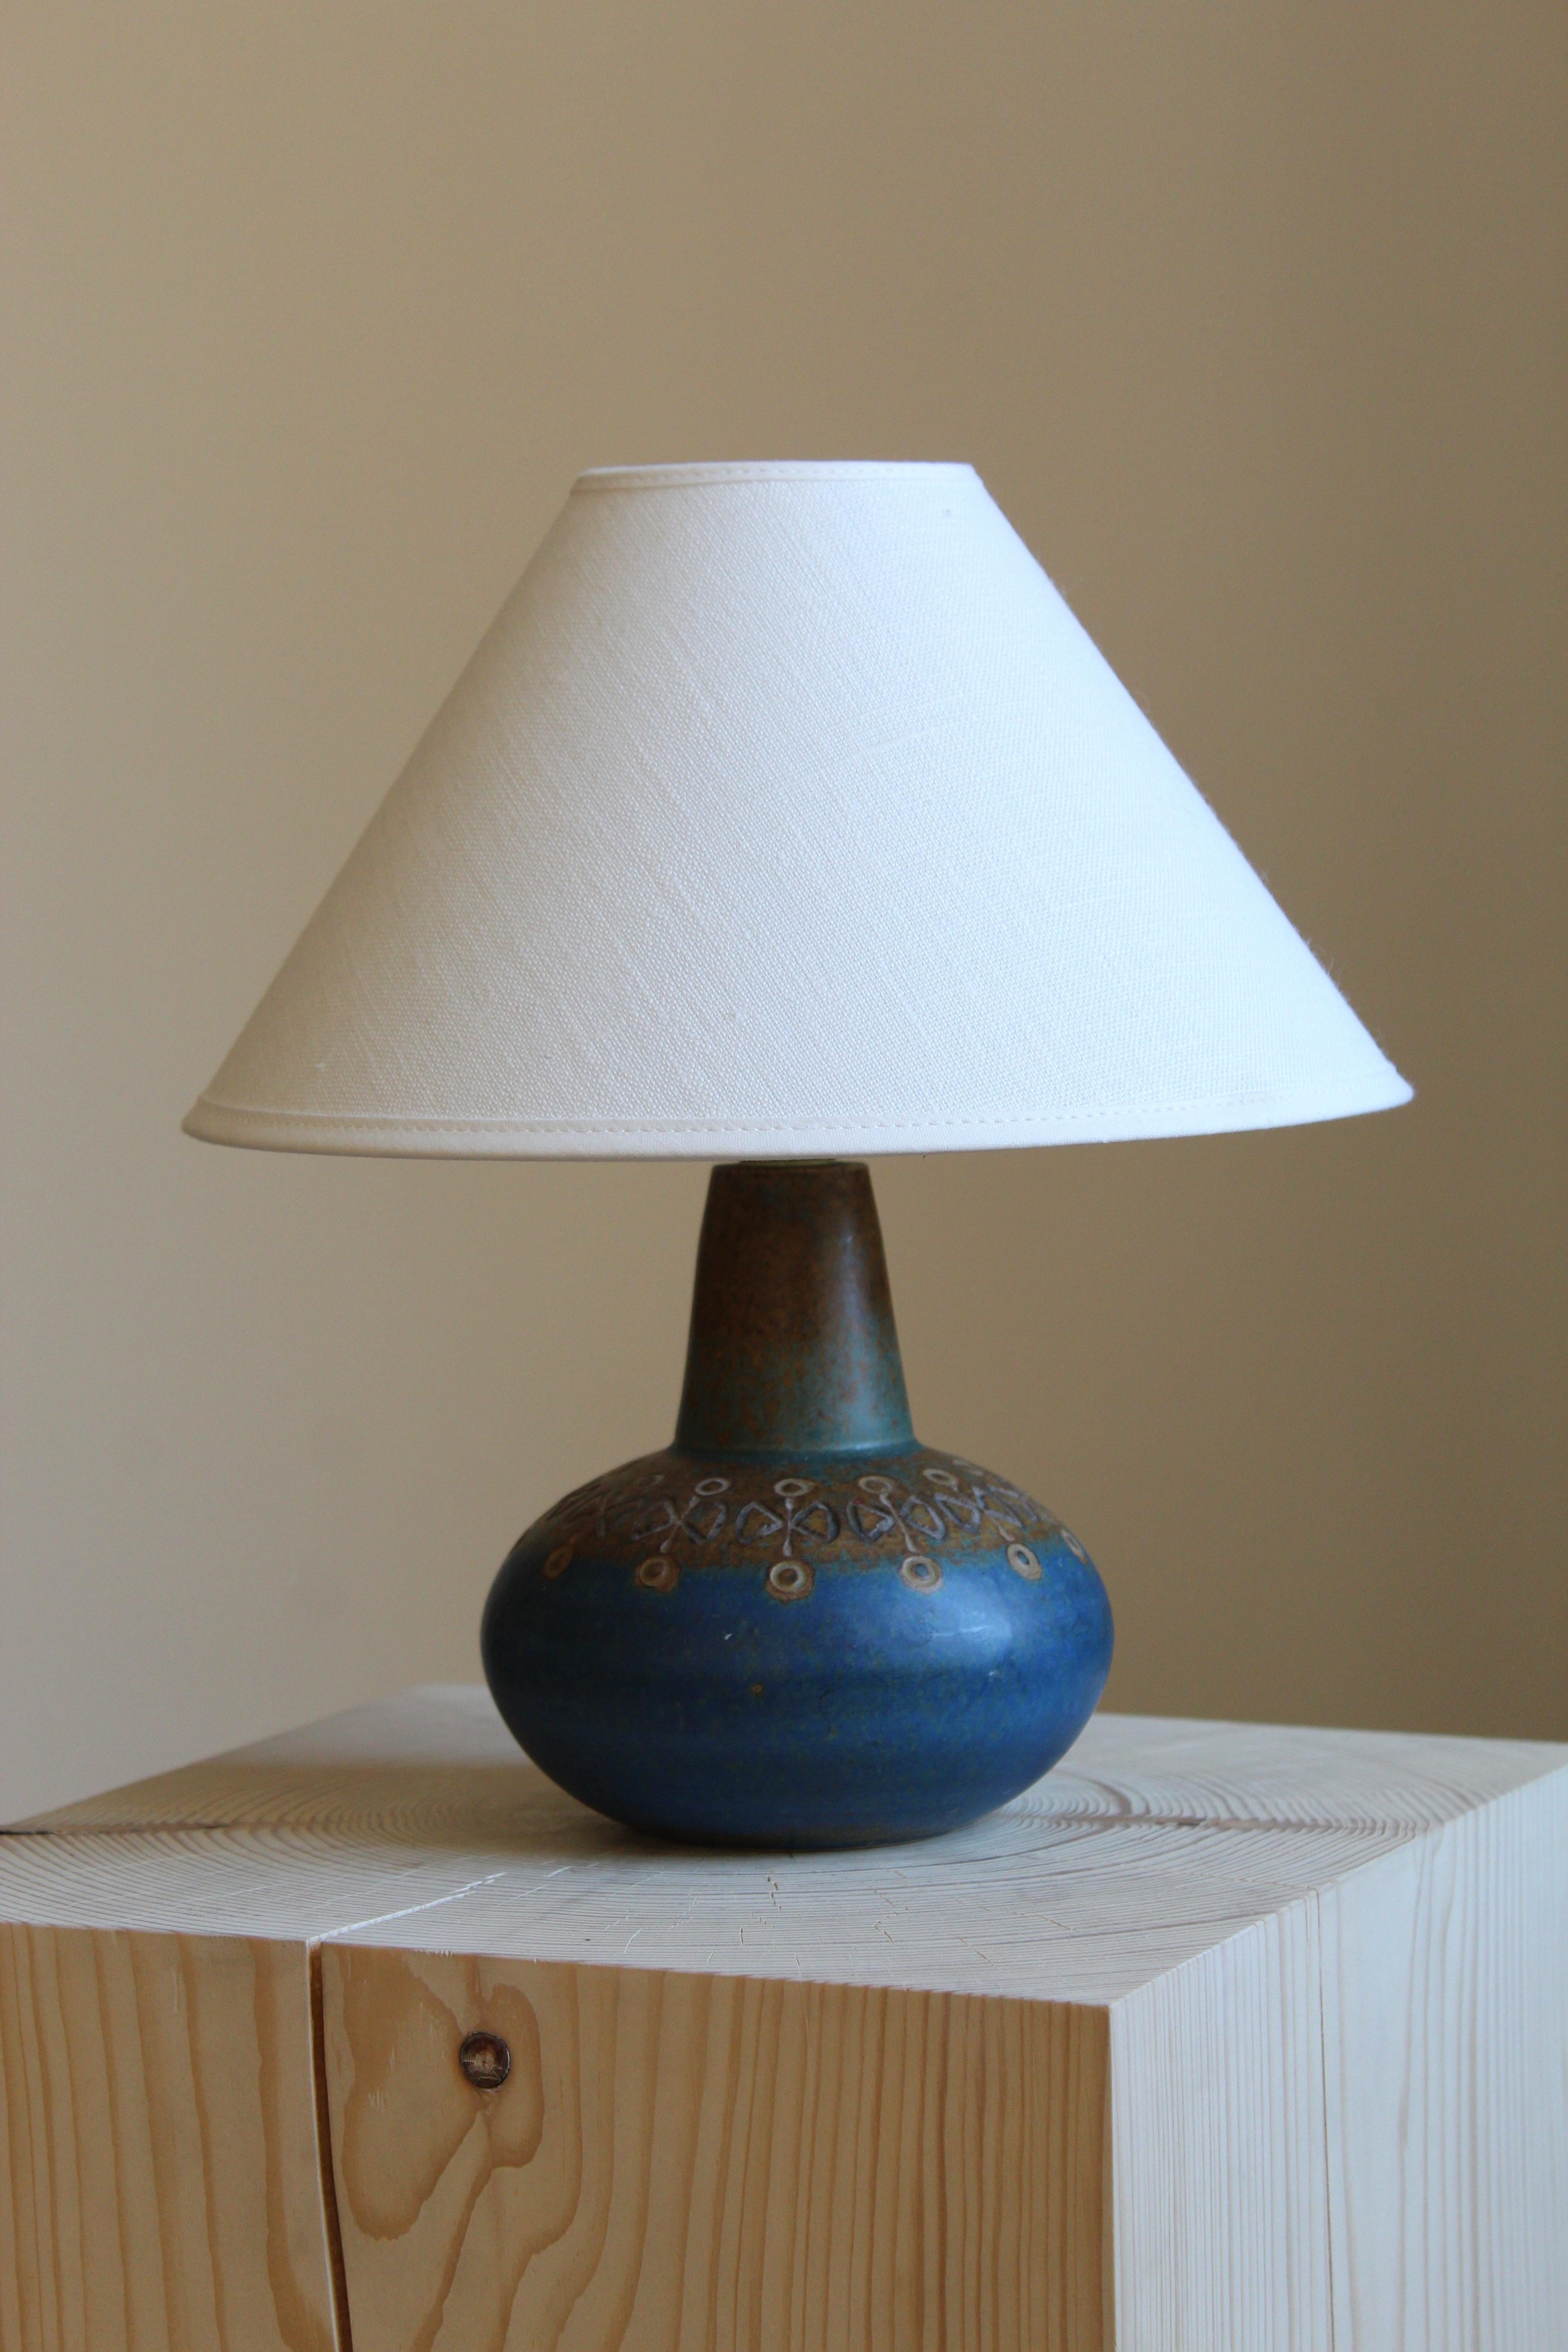 A table lamp by Ulla Winblad. Handcrafted in stoneware by Allingsås Keramik, Sweden, c. 1950s

Glaze features blue-brown colors.

Sold without lampshade. Stated dimensions exclude lampshade. 